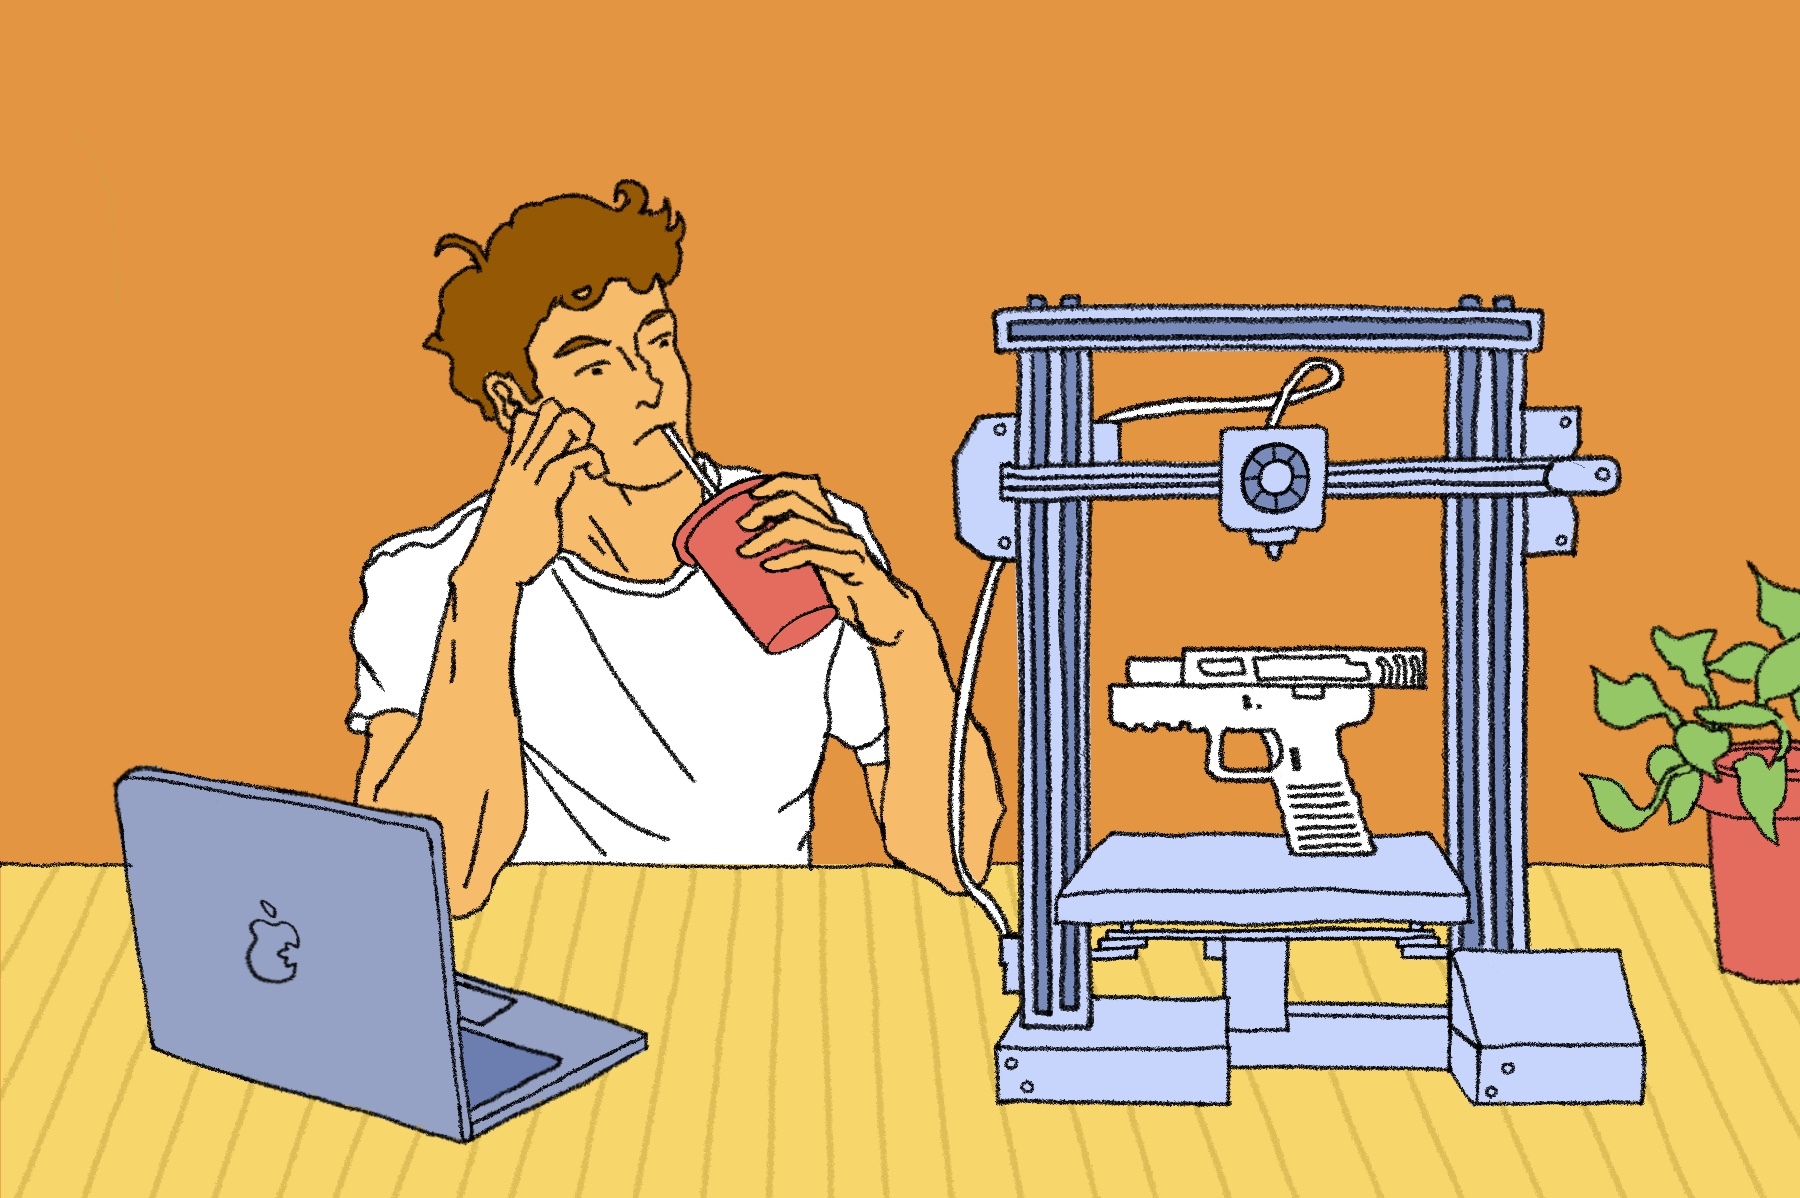 A drawing shows a person 3D printing a gun while drinking soda.